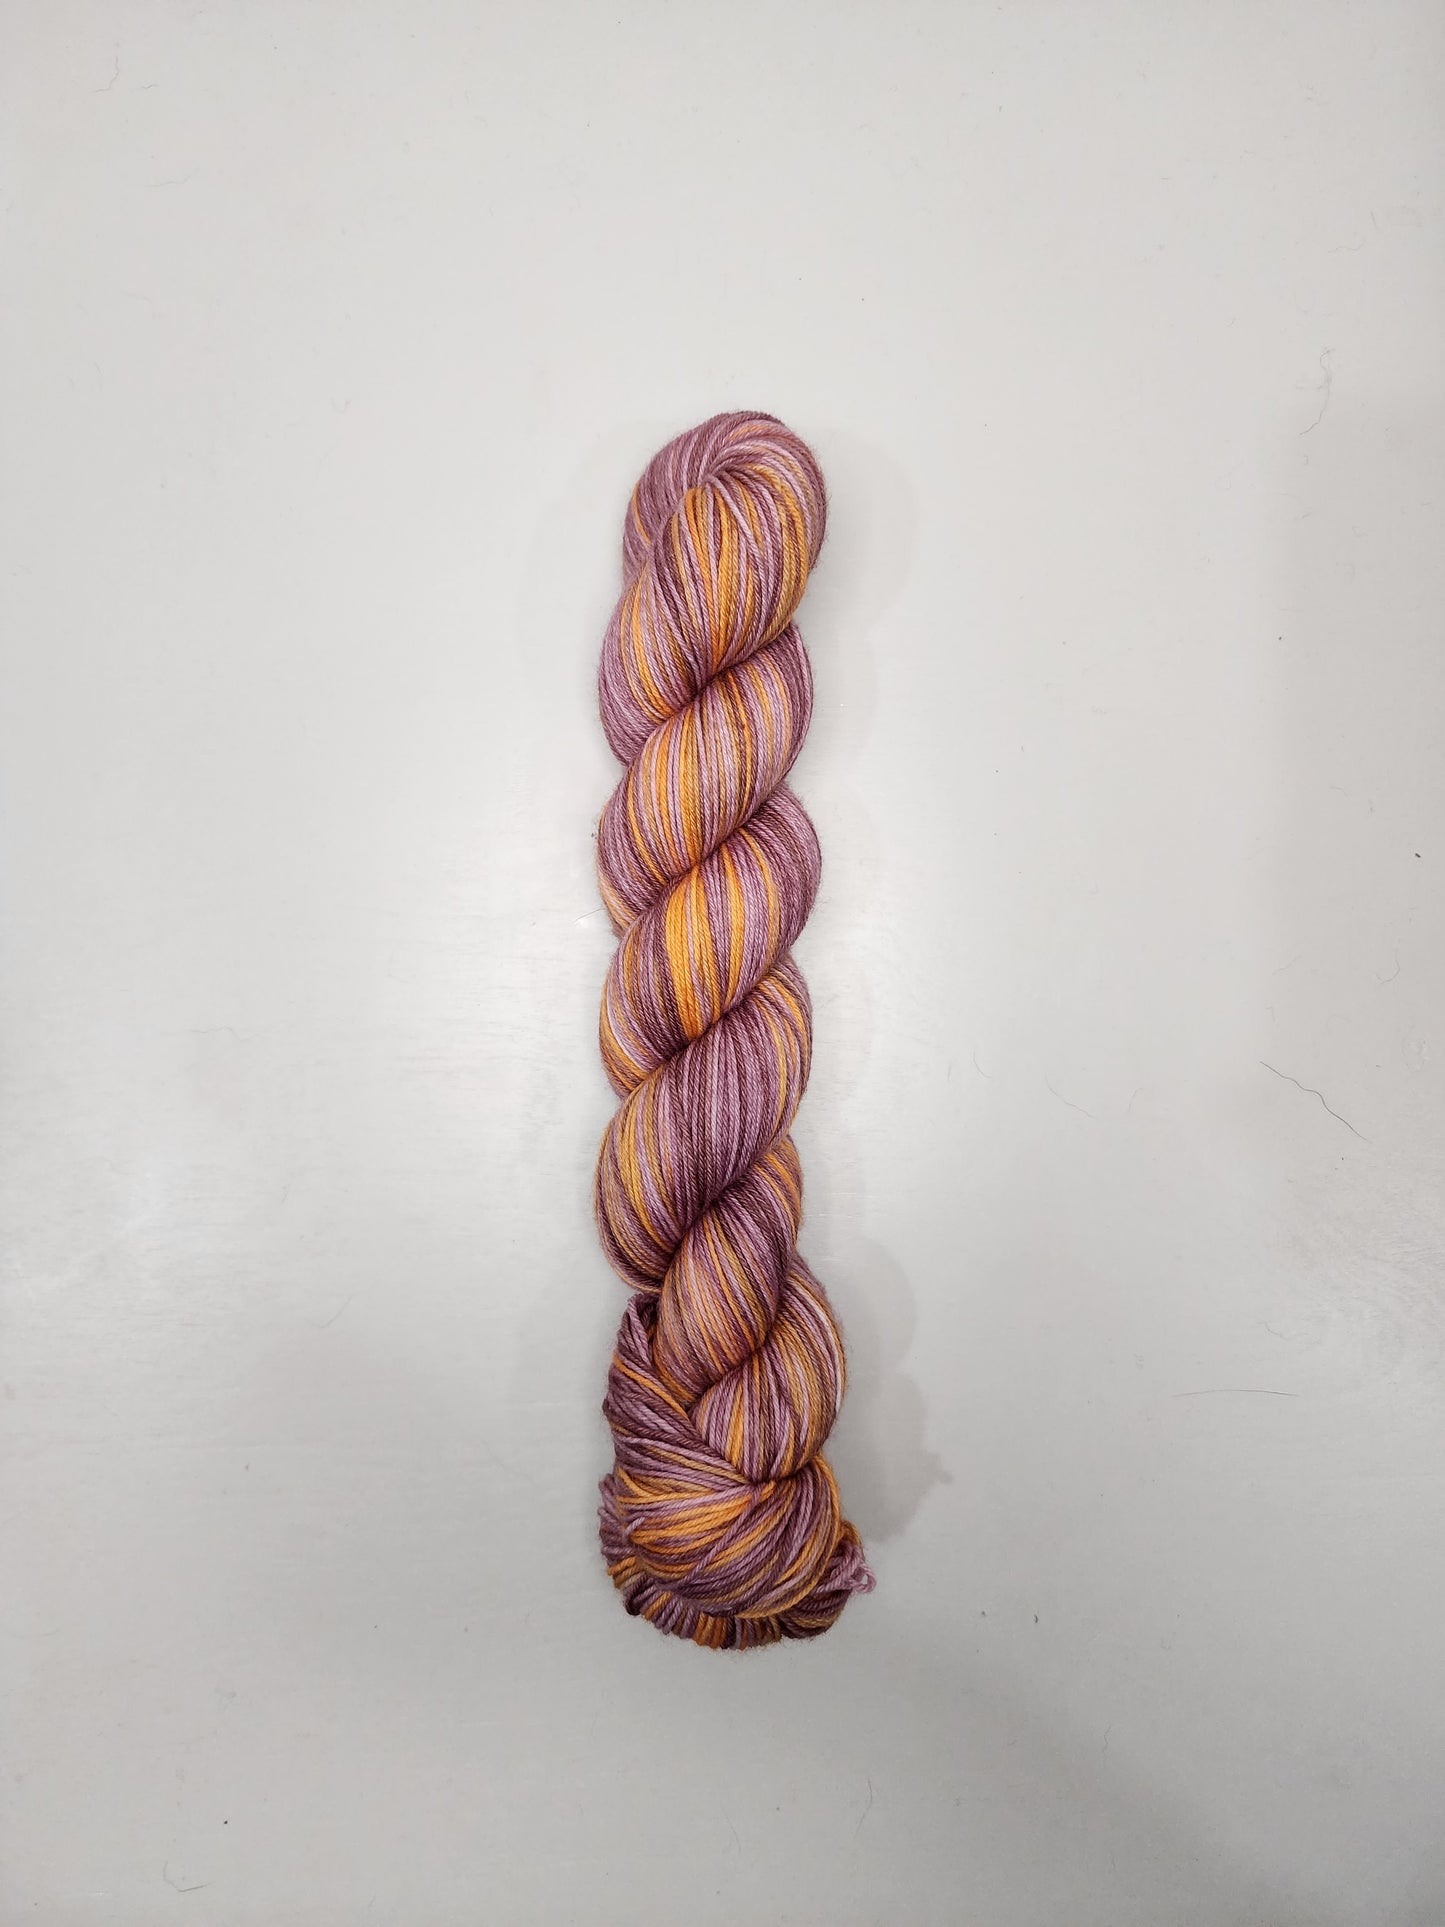 Ready To Ship - Once Upon a Dye Vol. 57 (Self Striping)